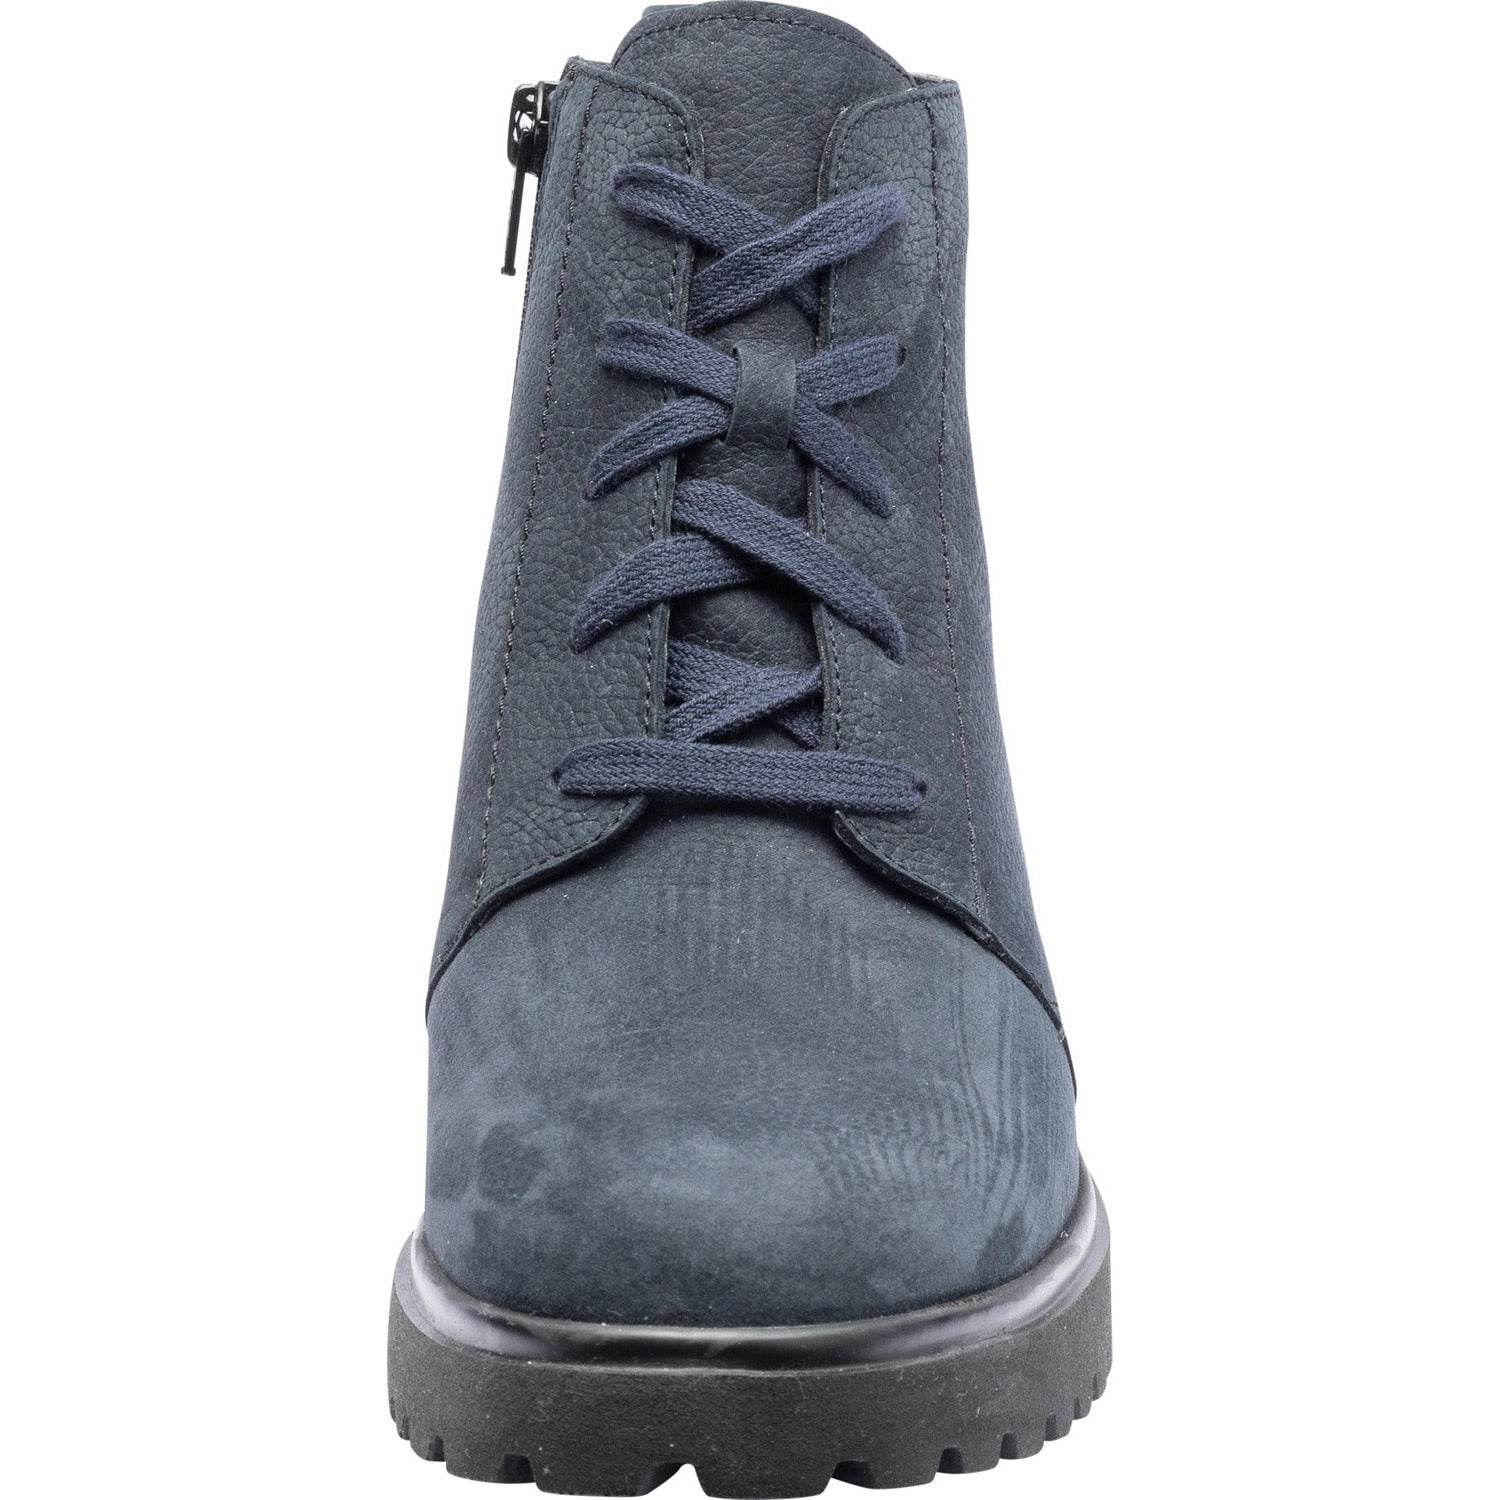 Waldlaufer Luise (716807) - Ladies Lace-up Boot with Zip in Navy Nubuck . Waldlaufer Shoes & Boots | Wide fit Shoes | Wisemans | Bantry | West Cork | Cork | Ireland